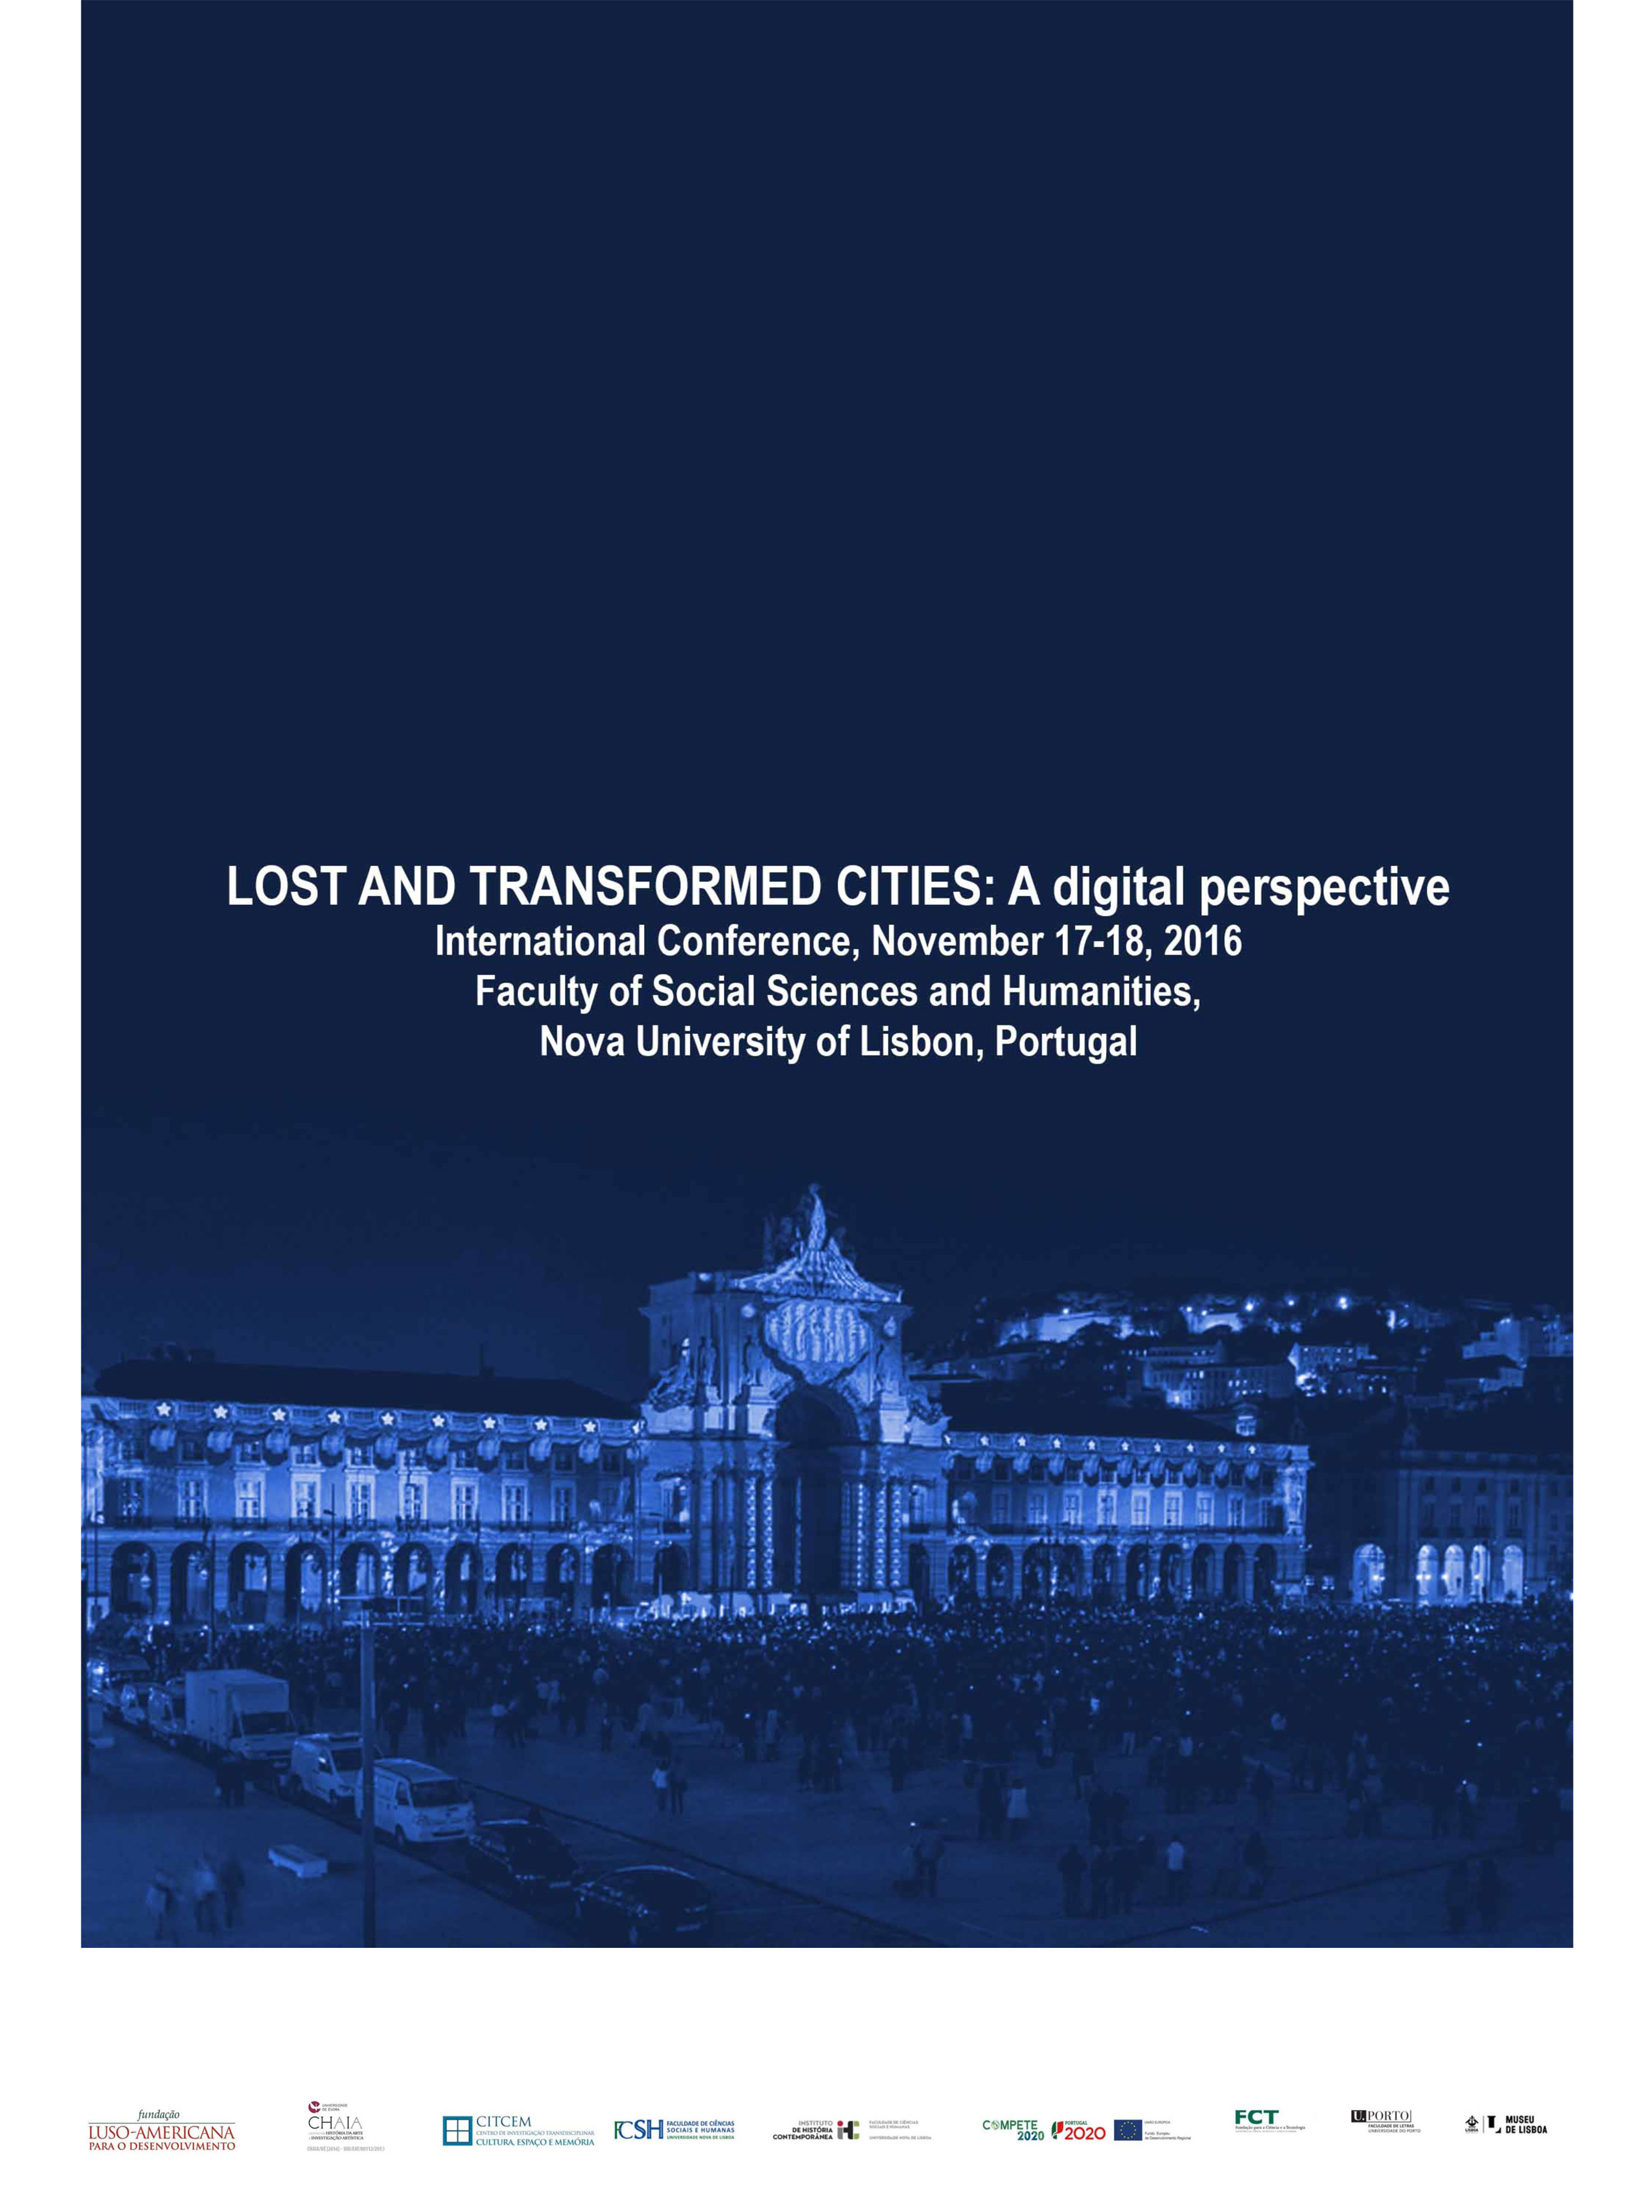 International Conference Lost and Transformed Cities: A Digital Perspective